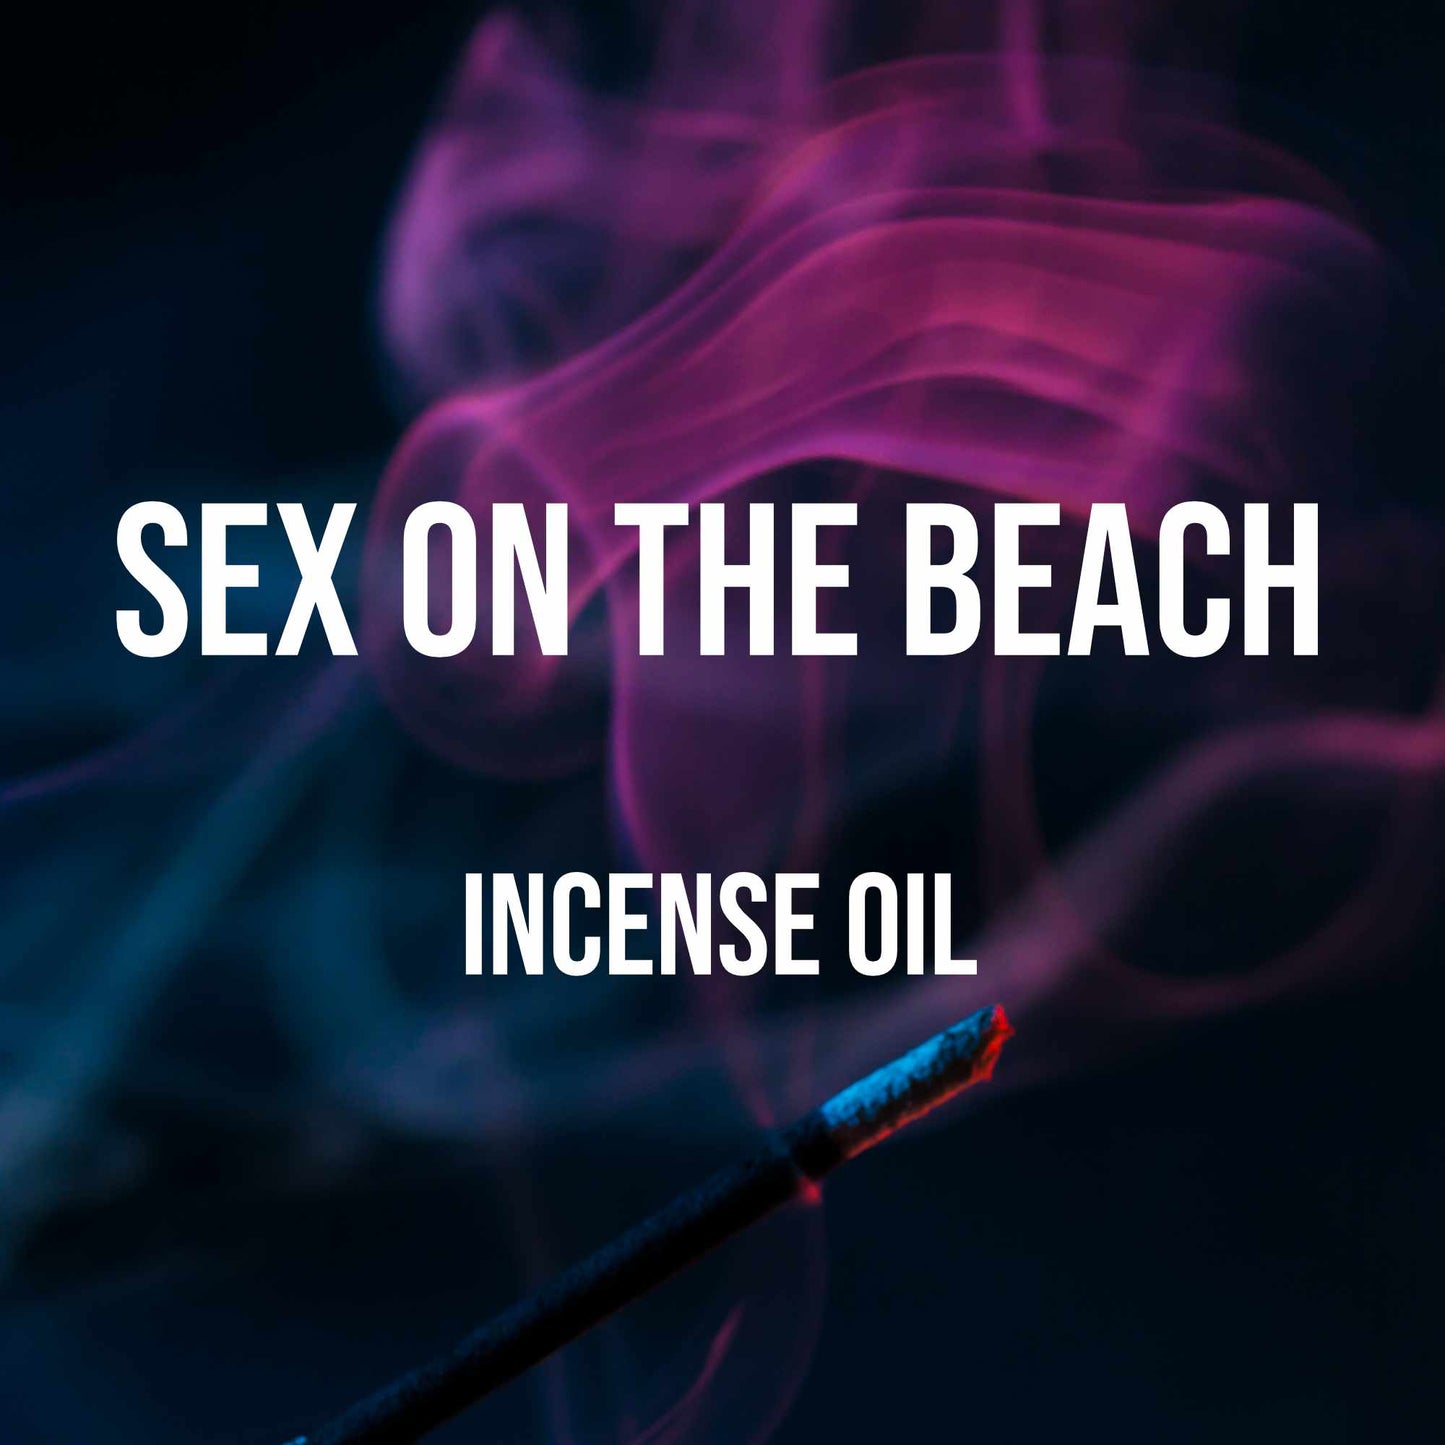 Sex on the Beach Incense Oil